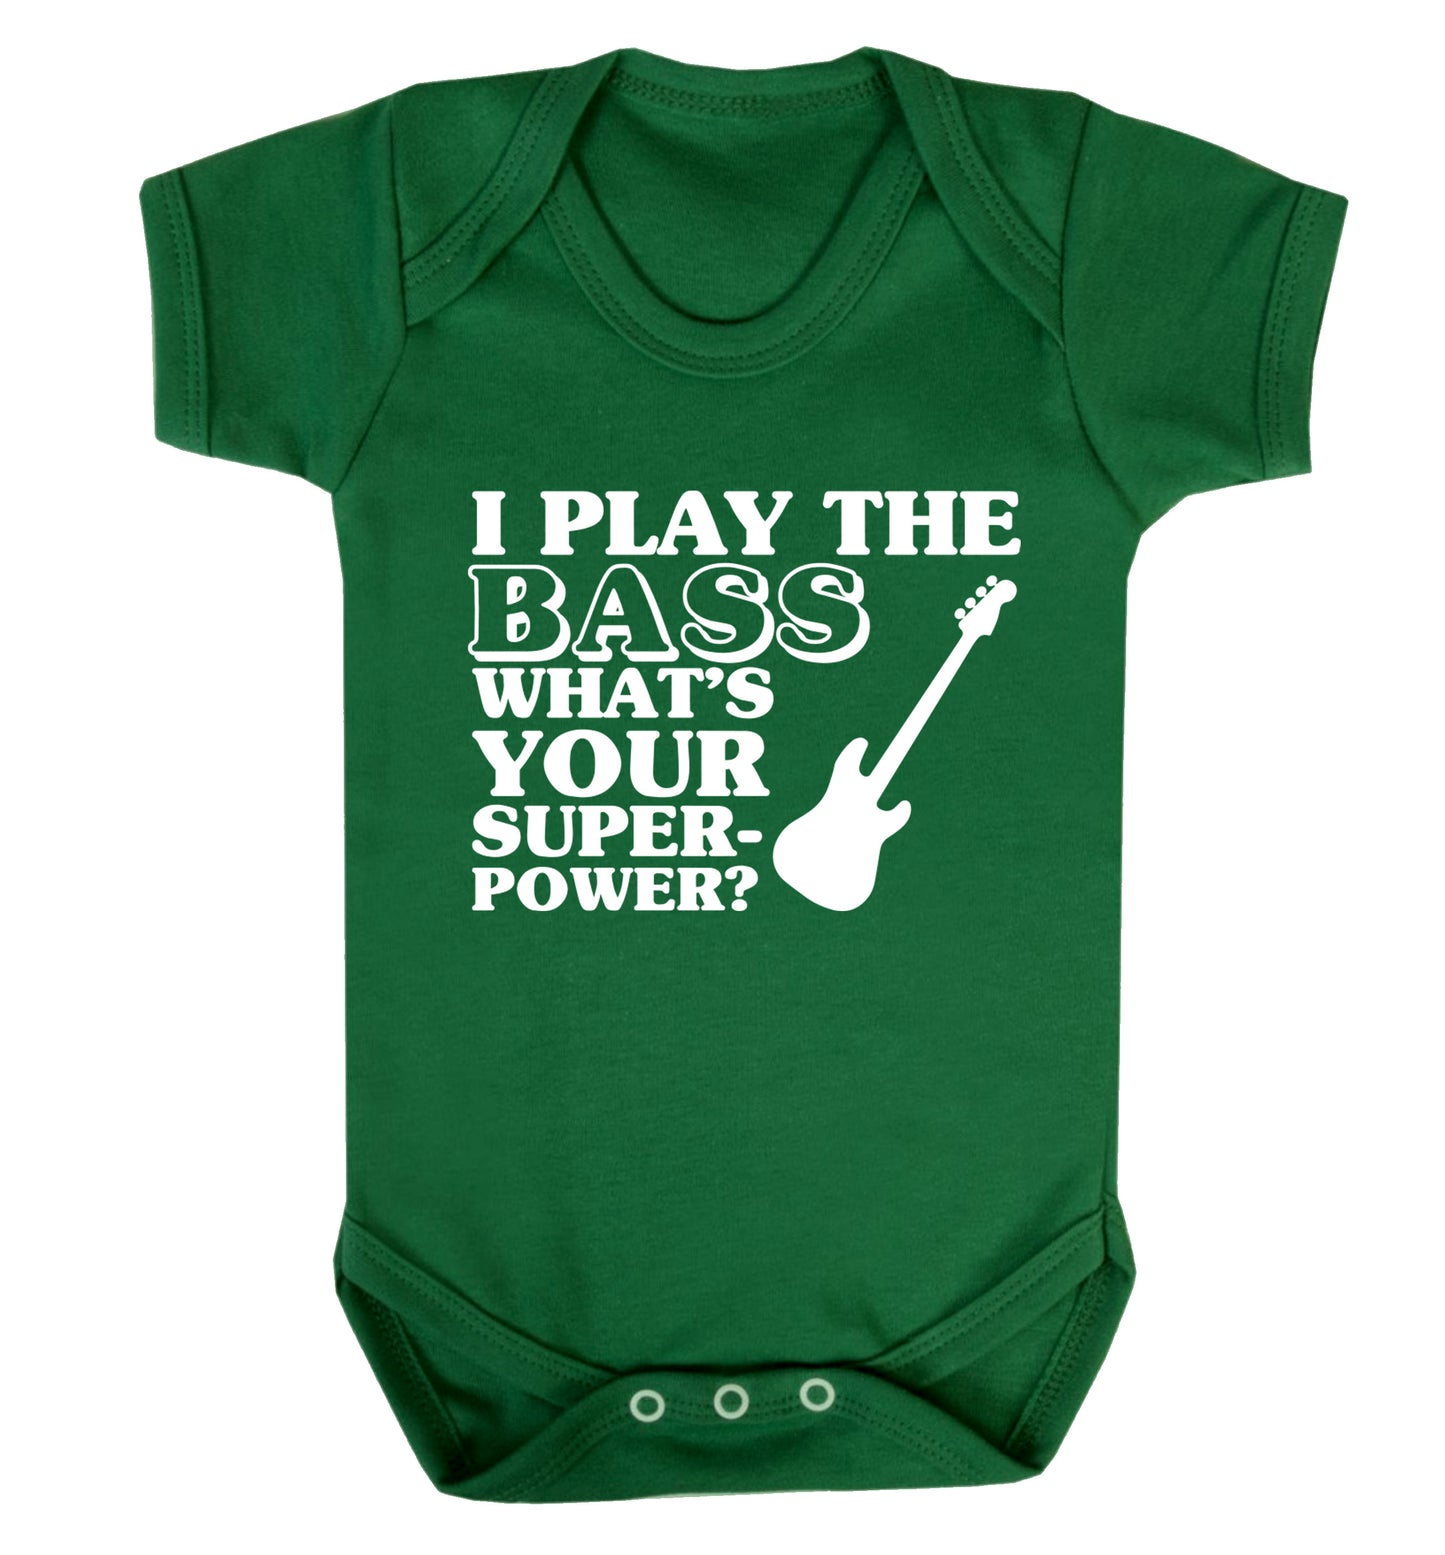 I play the bass what's your superpower? Baby Vest green 18-24 months